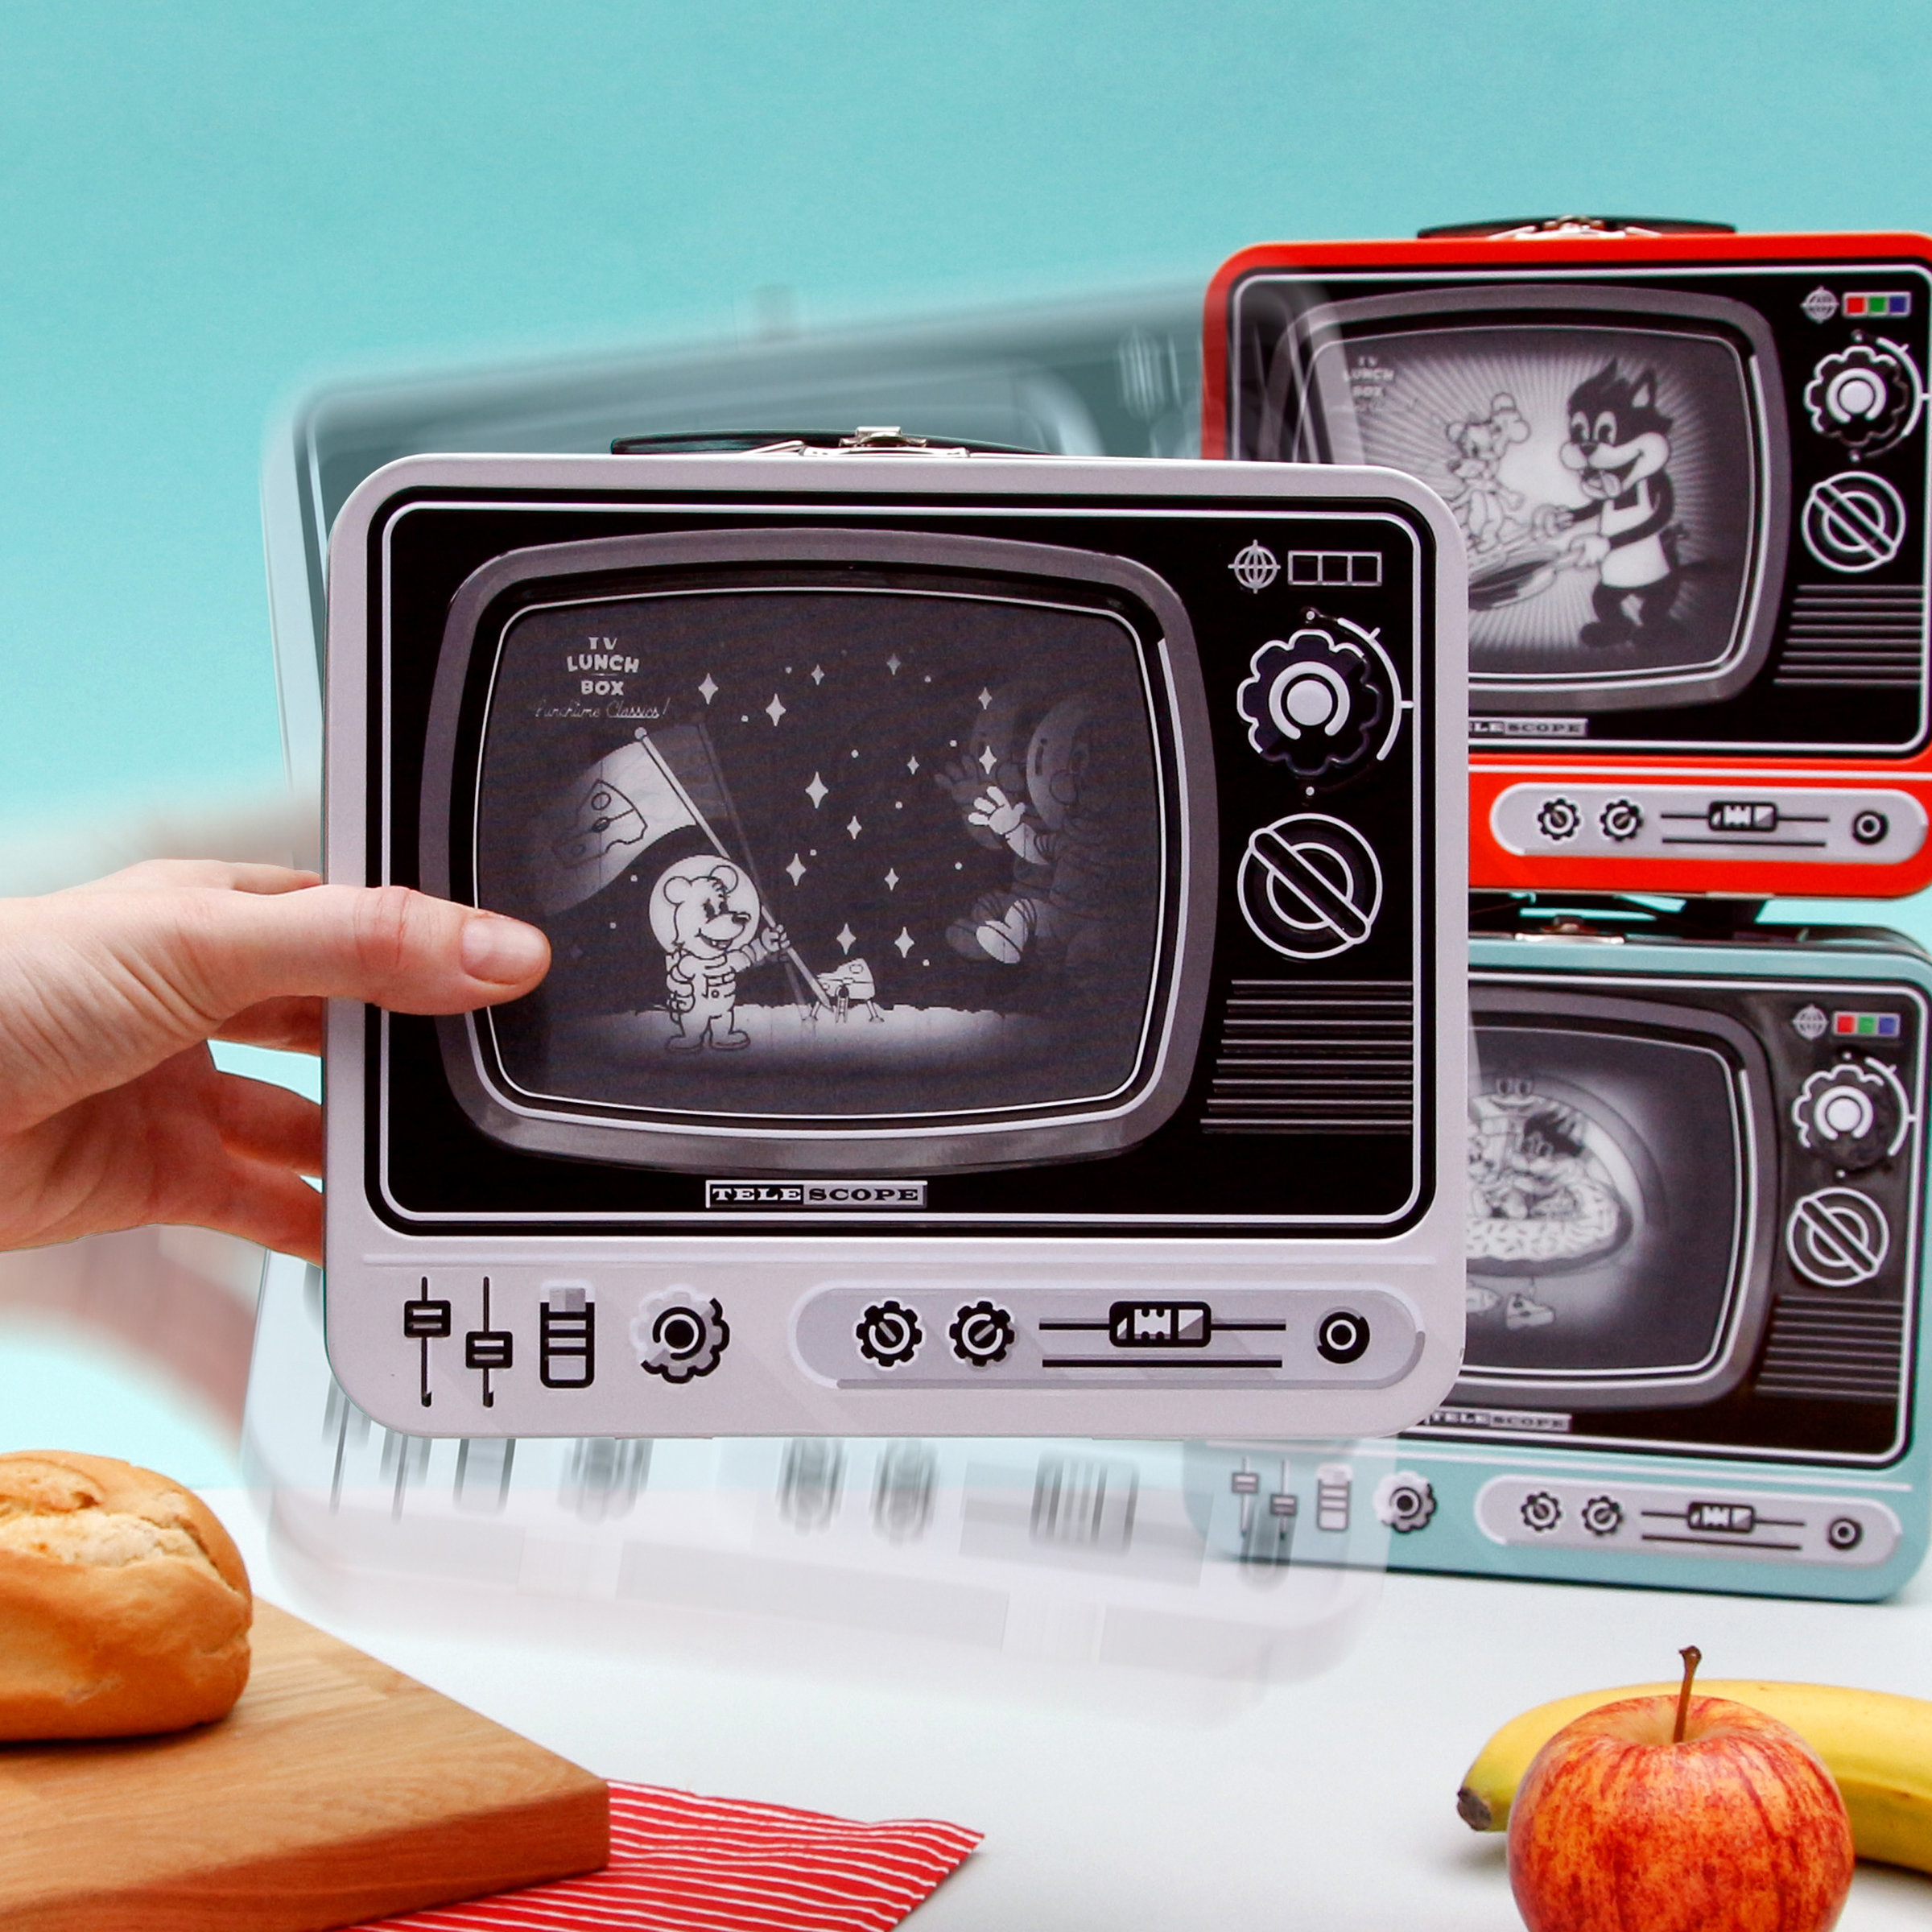 TV Lunch Box with Lenticular screen